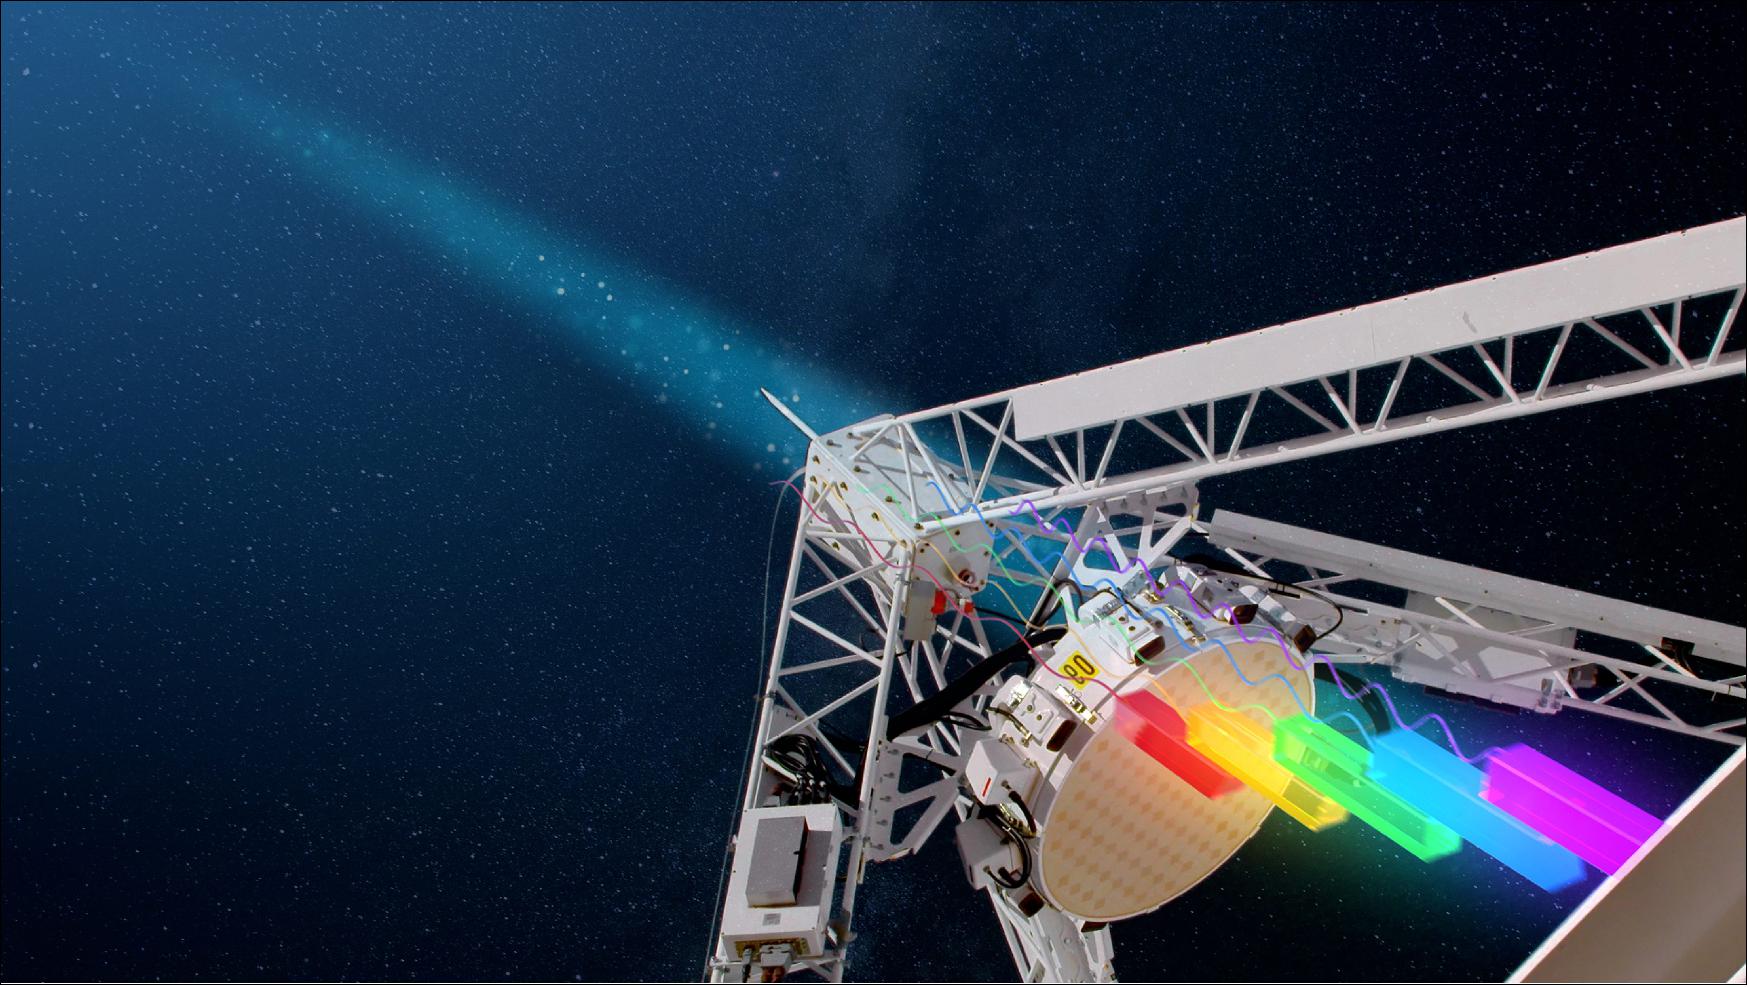 Figure 49: CSIRO’s ASKAP radio telescope measures the delay between the wavelengths of a fast radio burst, allowing astronomers to calculate the density of the missing matter in the Universe (image credit: ICRAR and CSIRO/Alex Cherney)